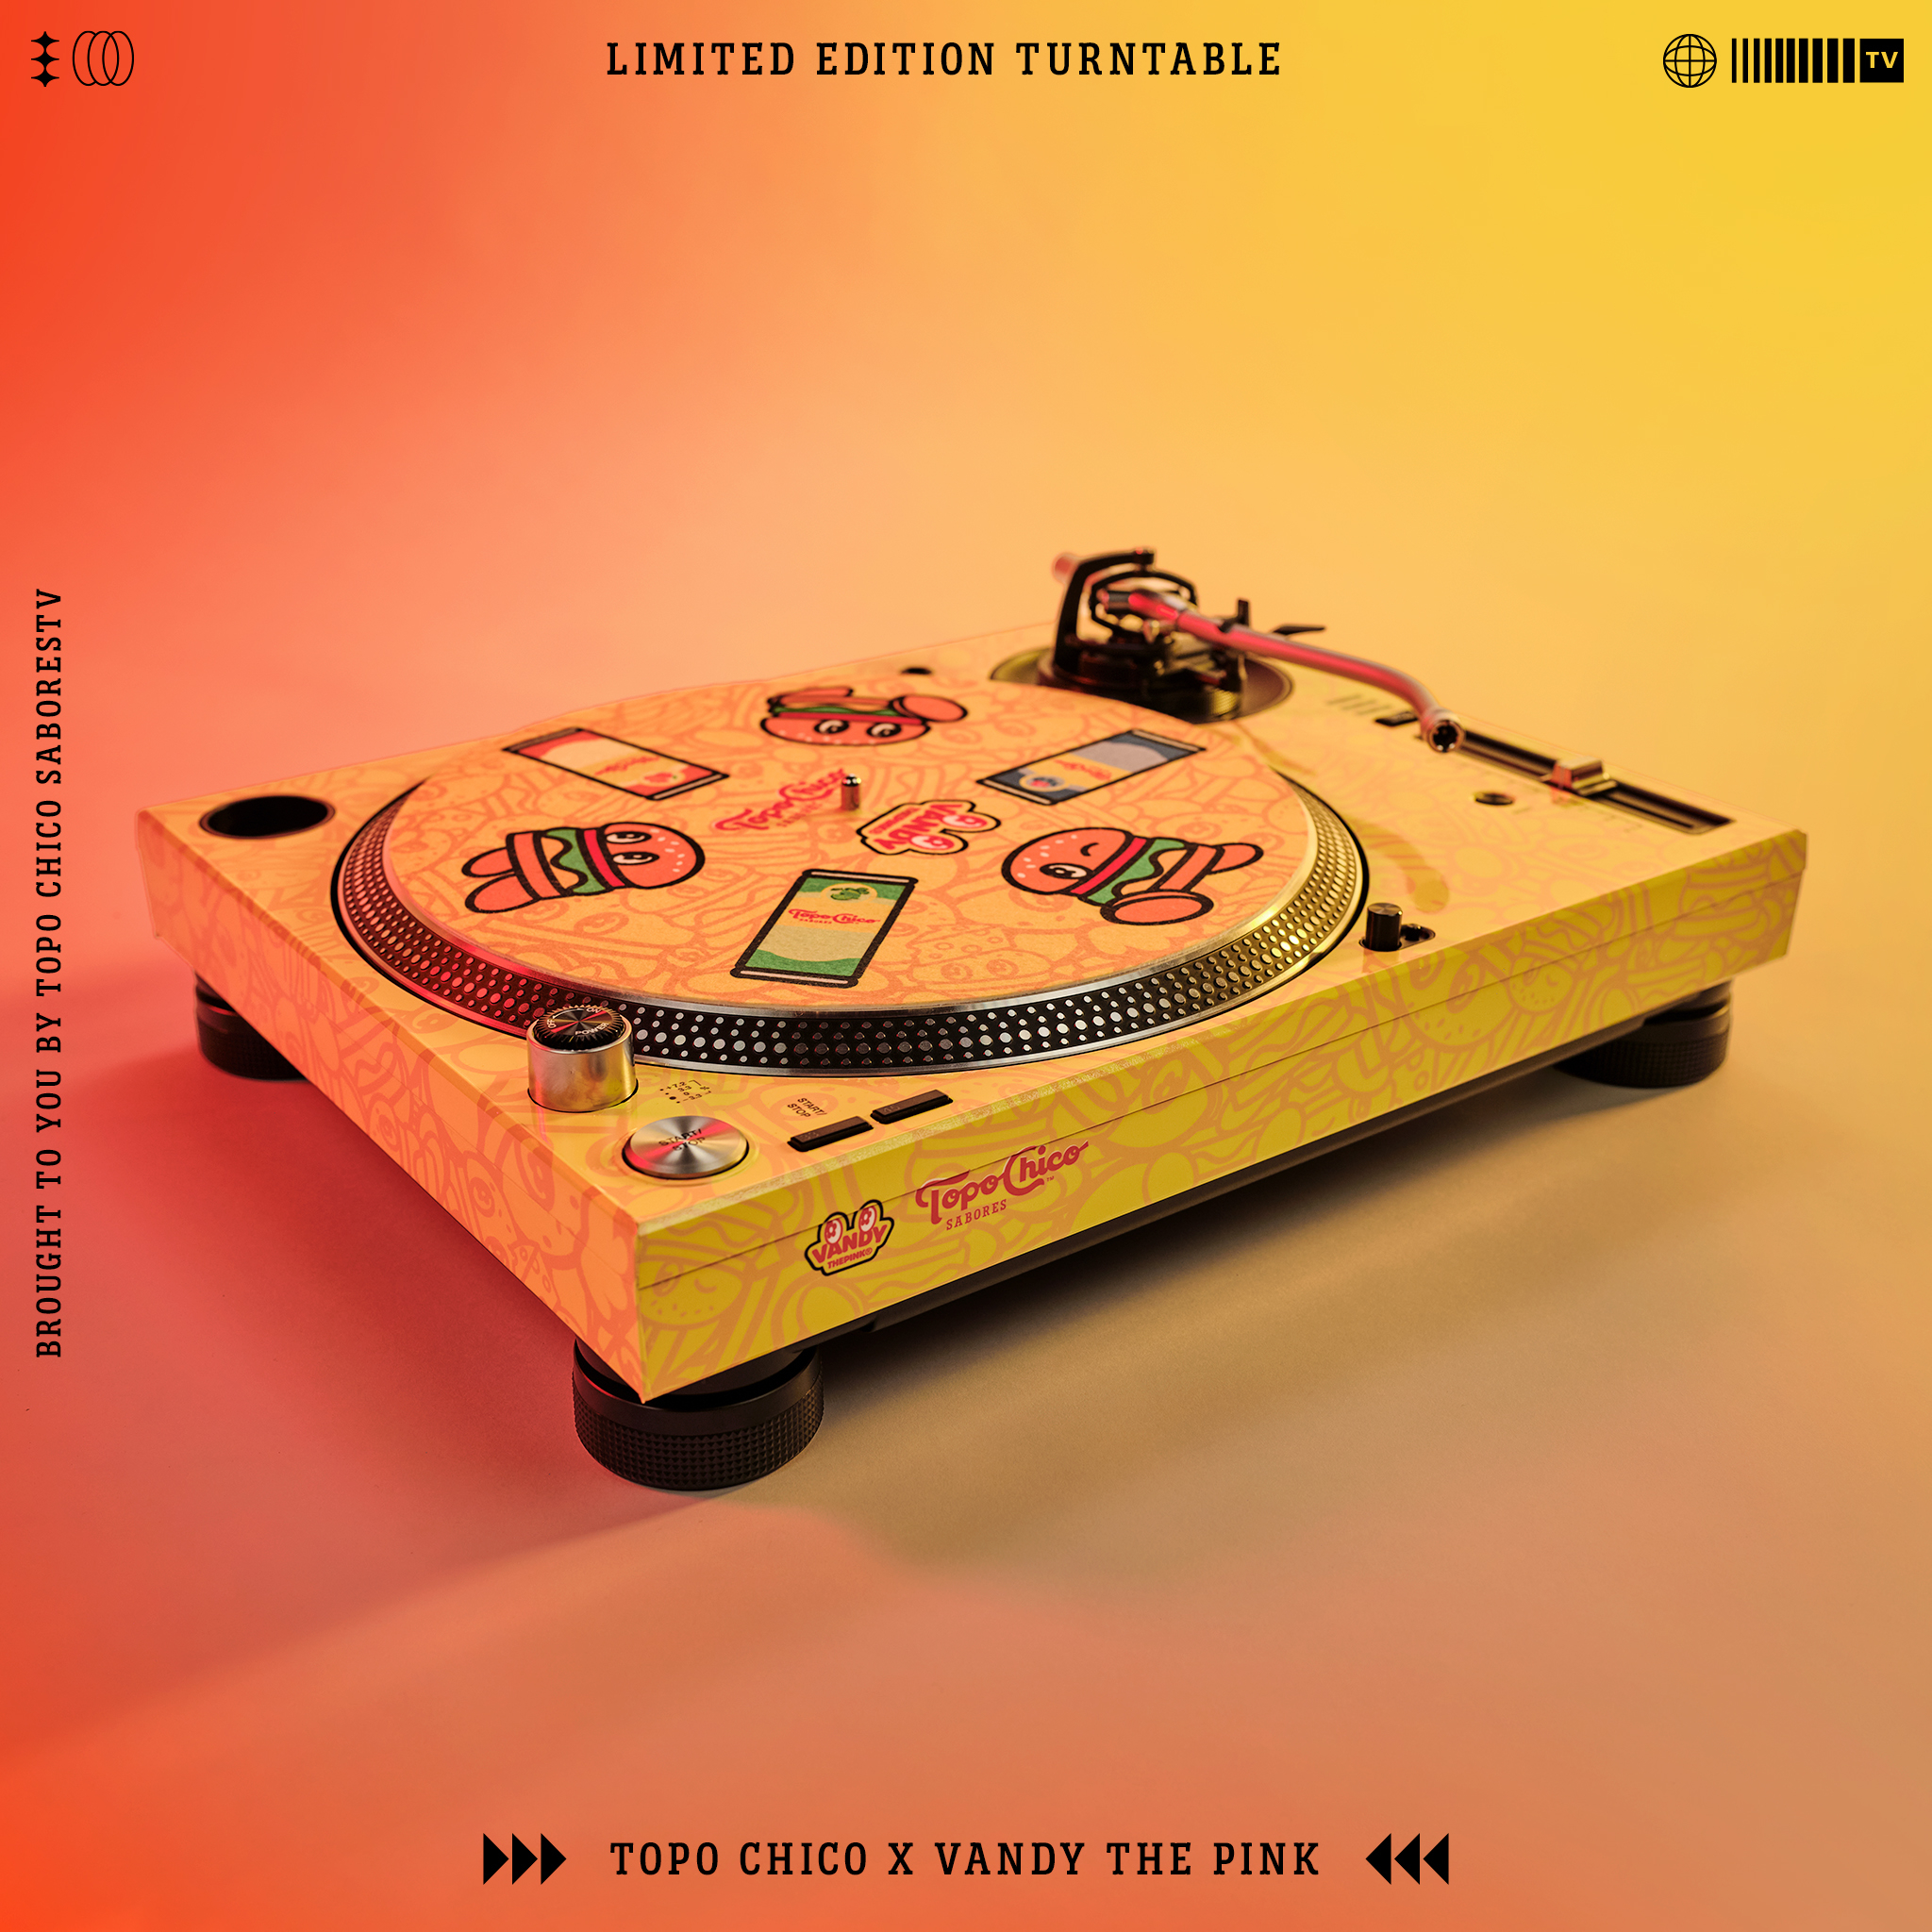 Limited edition turntable with Topo Chico and Vandy the Pink collaboration design, featuring colorful cartoon graphics and promotional text